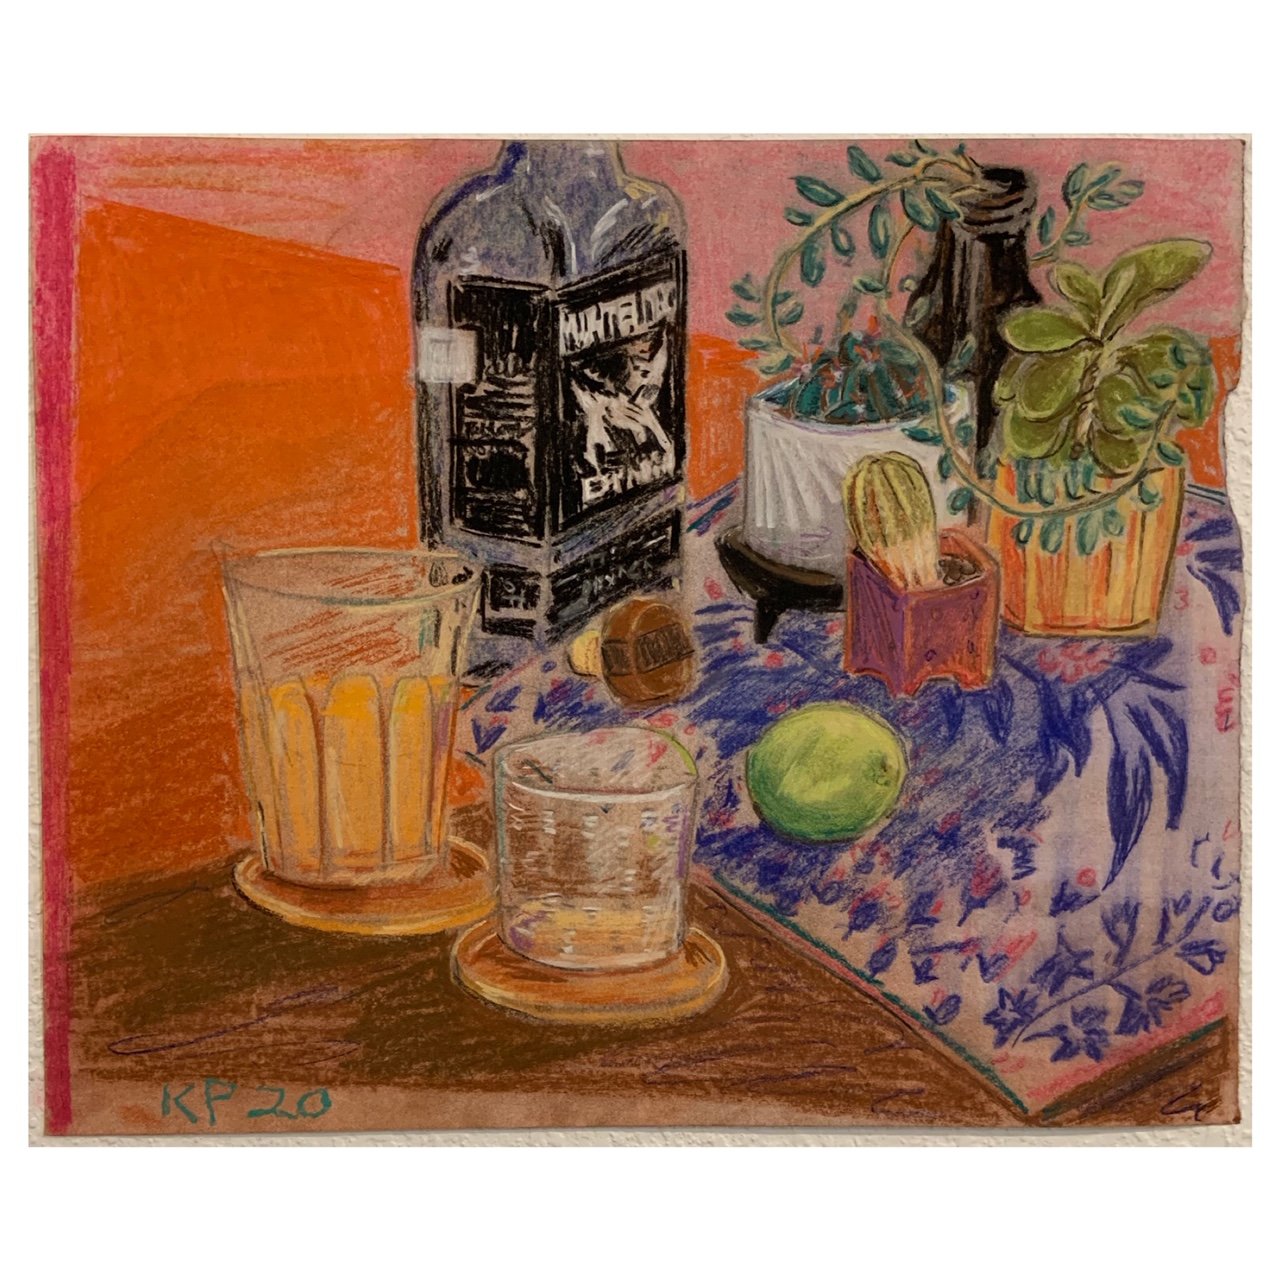 Stil life with suculents and mezcal. Conté crayon and charcoal on paper .30.5 x 36.8cm. 2020. 1100€ 